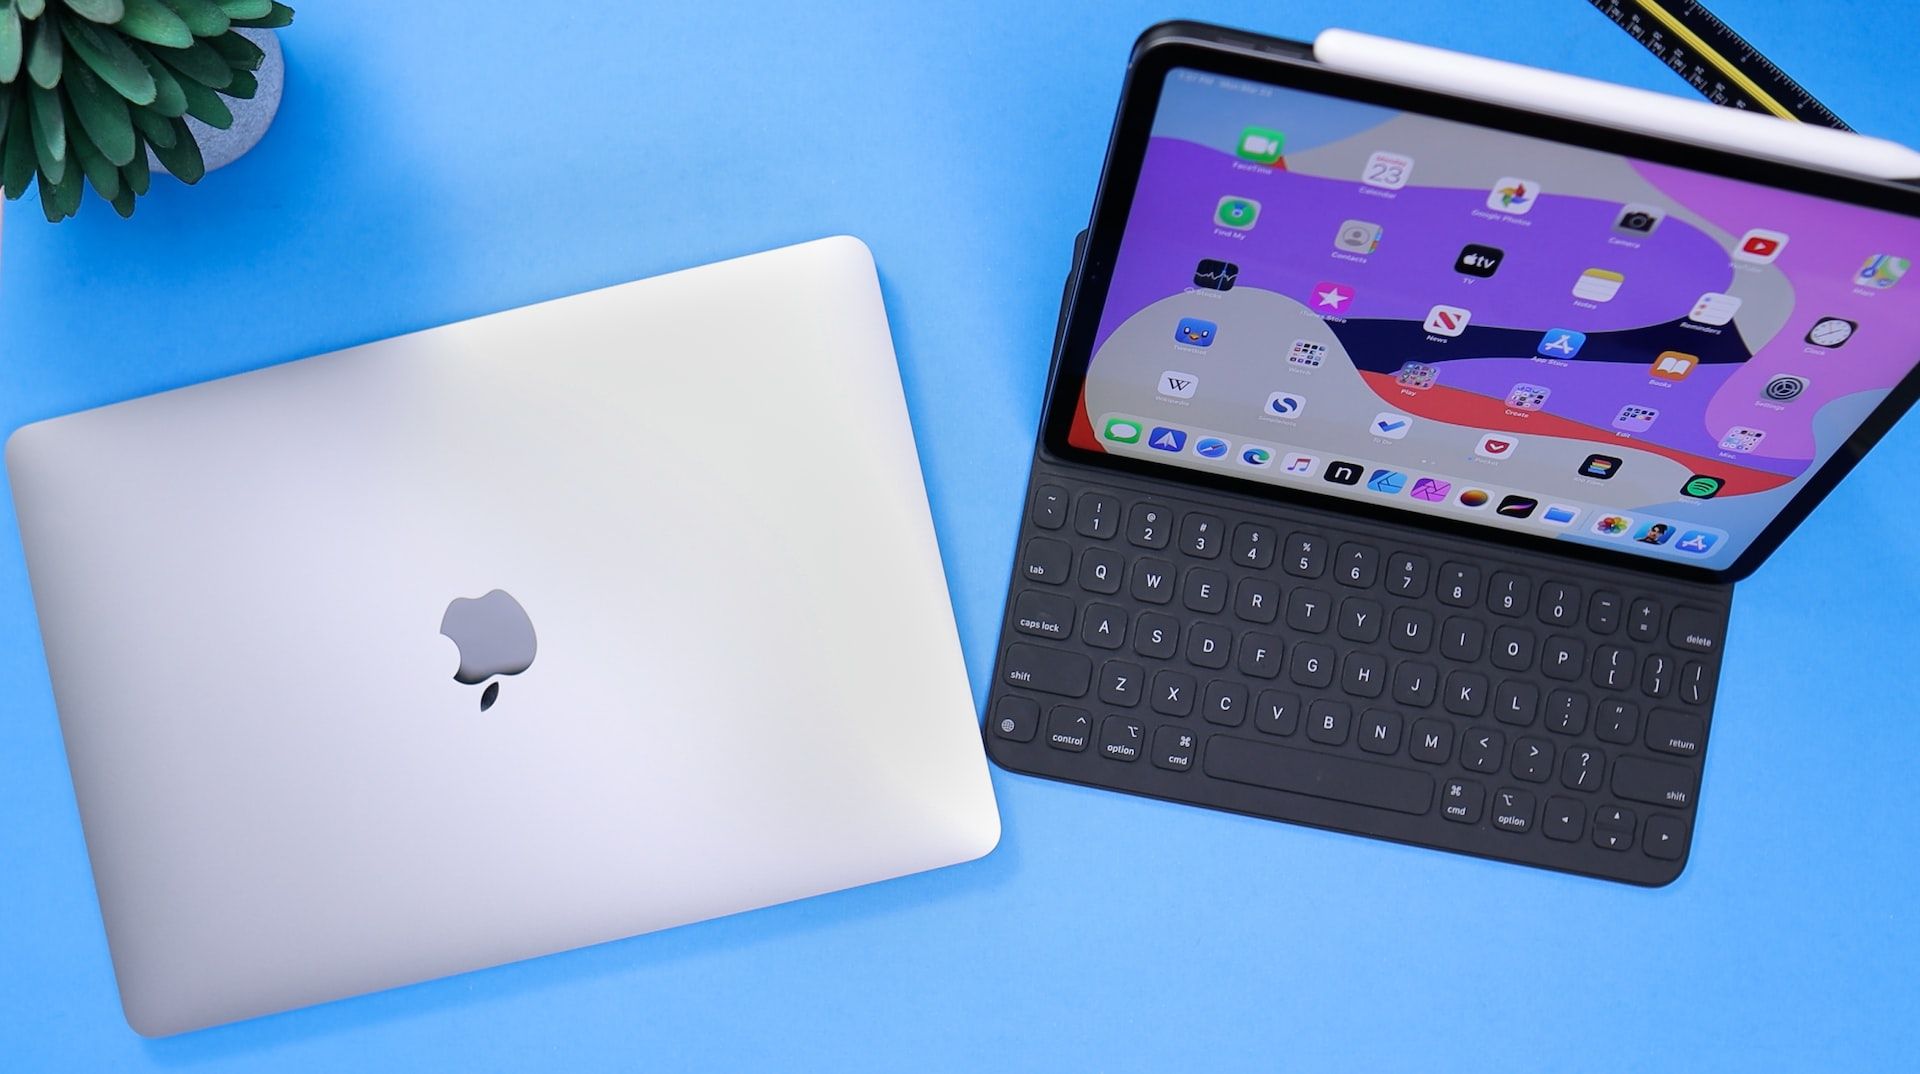 iPad and a closed MacBook on a blue background